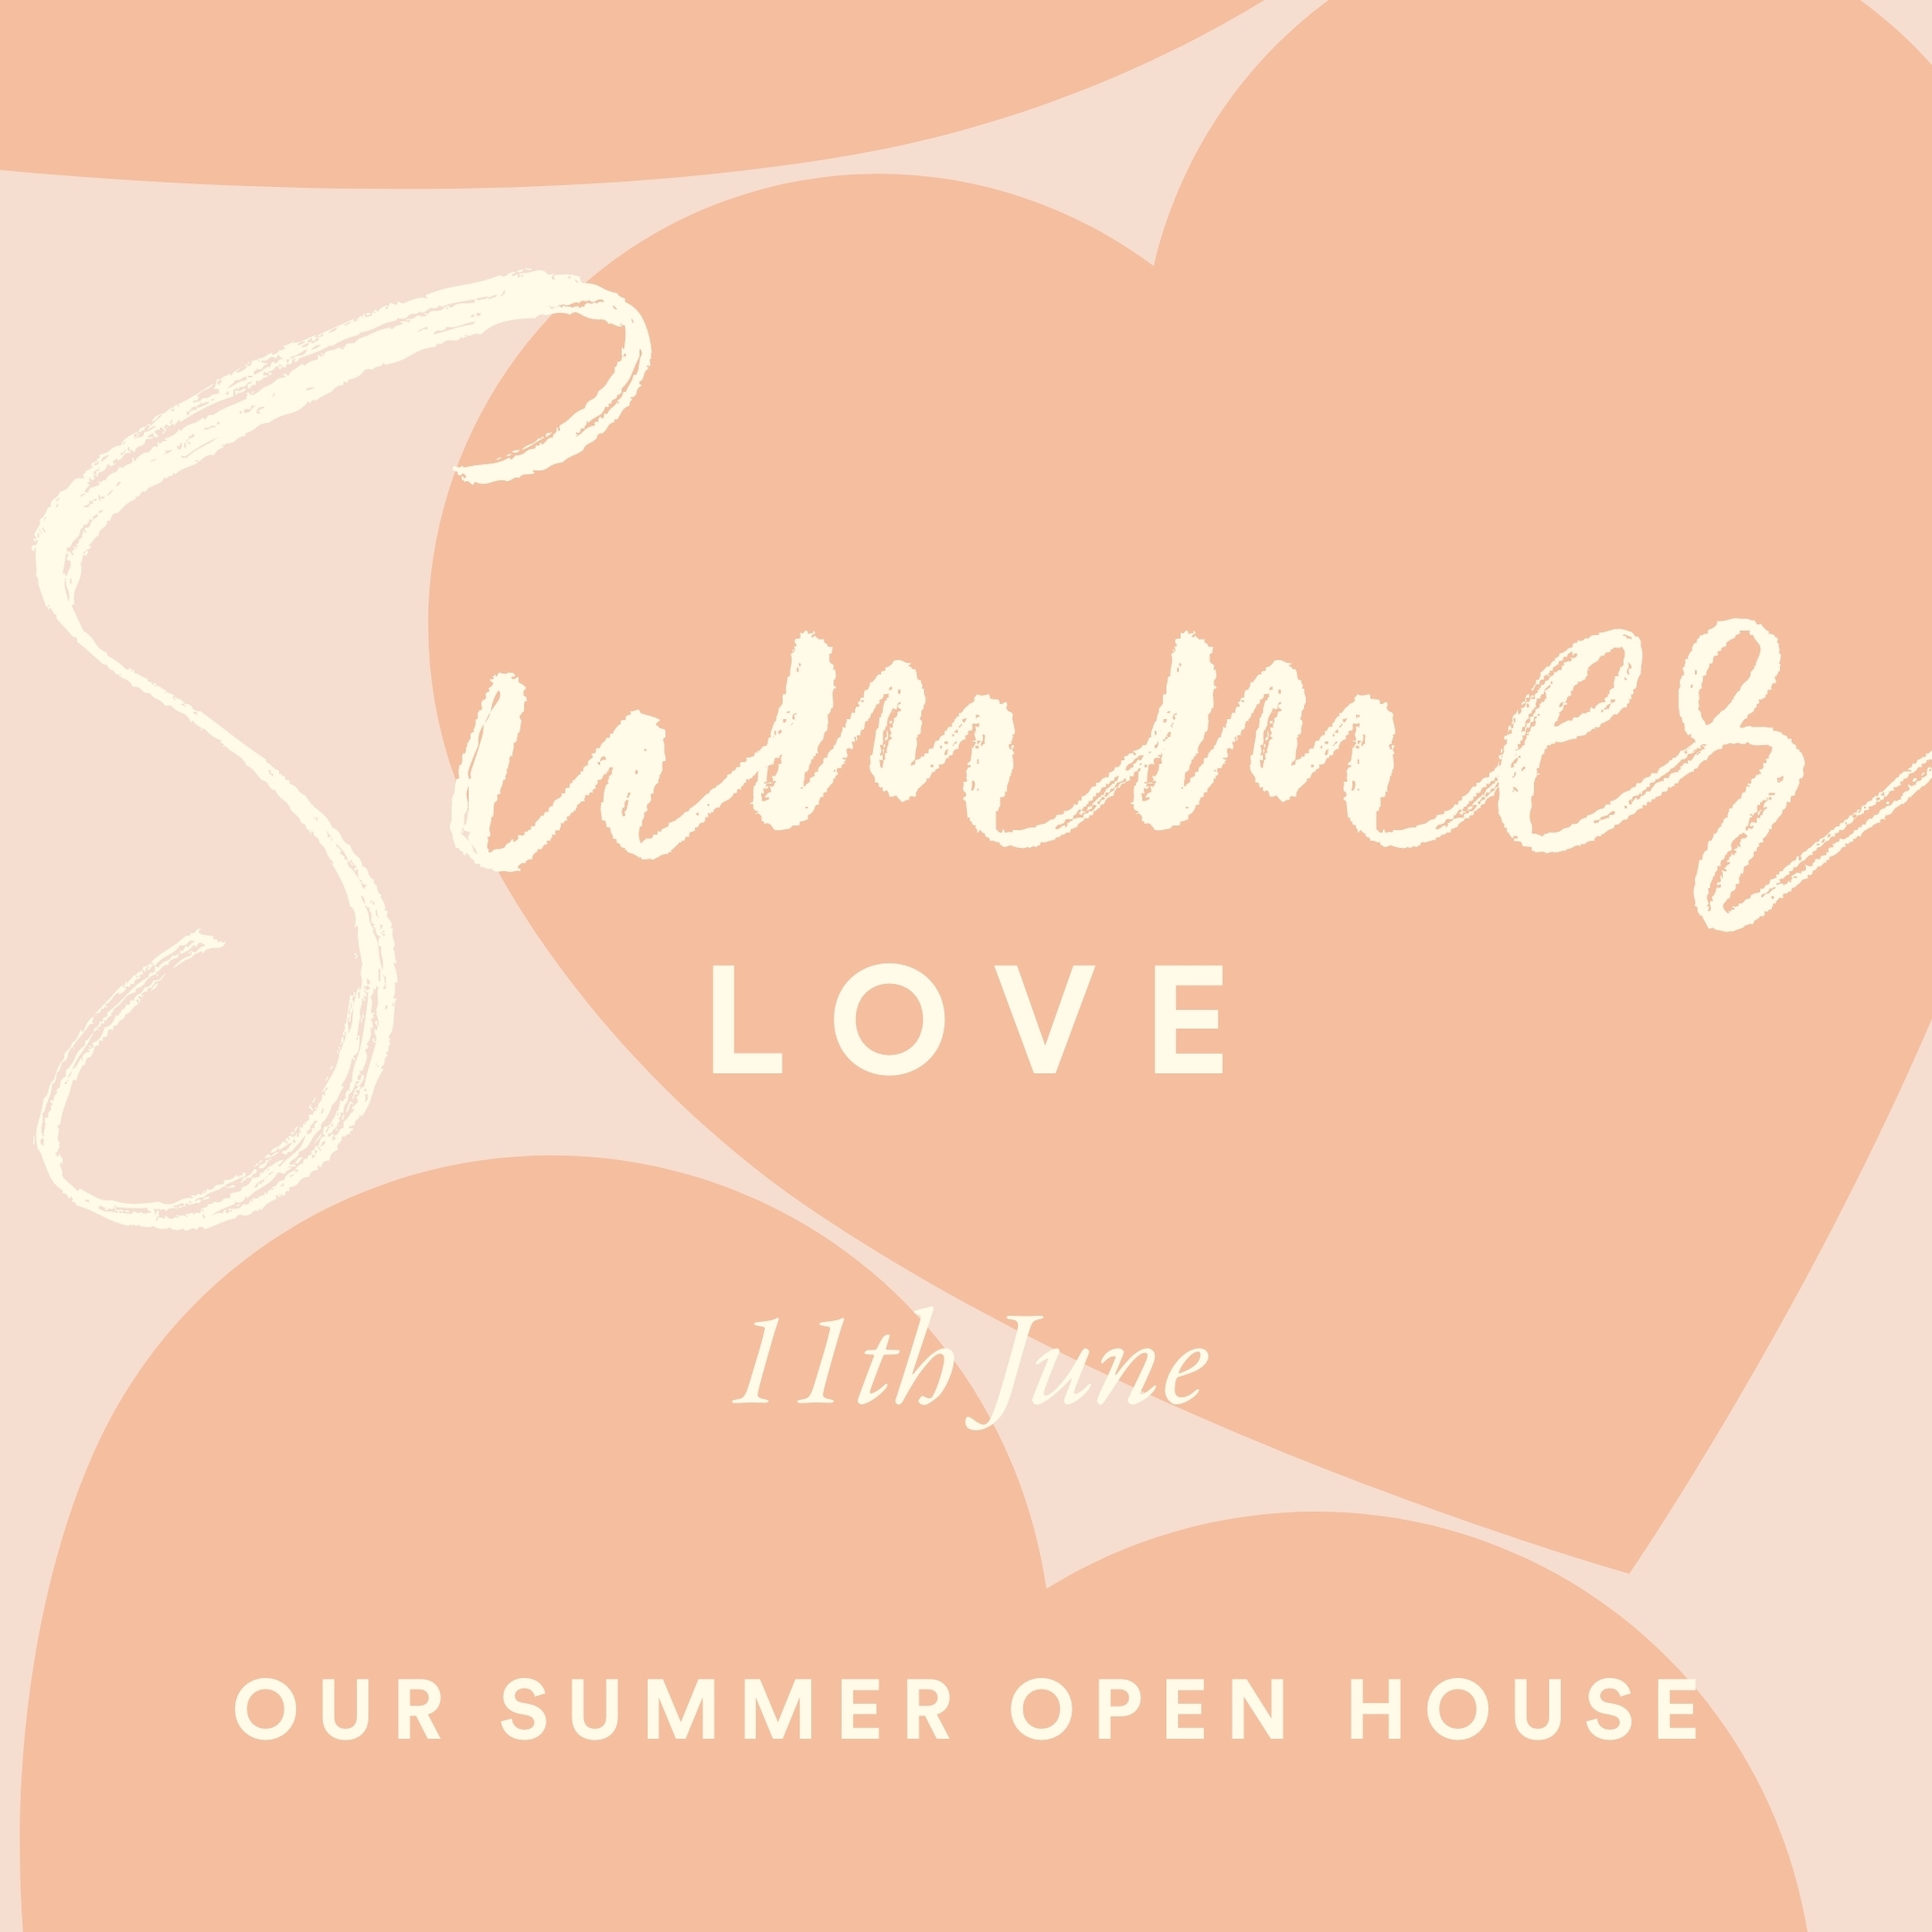 Summer Love - Our Next Weddings & Events Open House! - Image 1